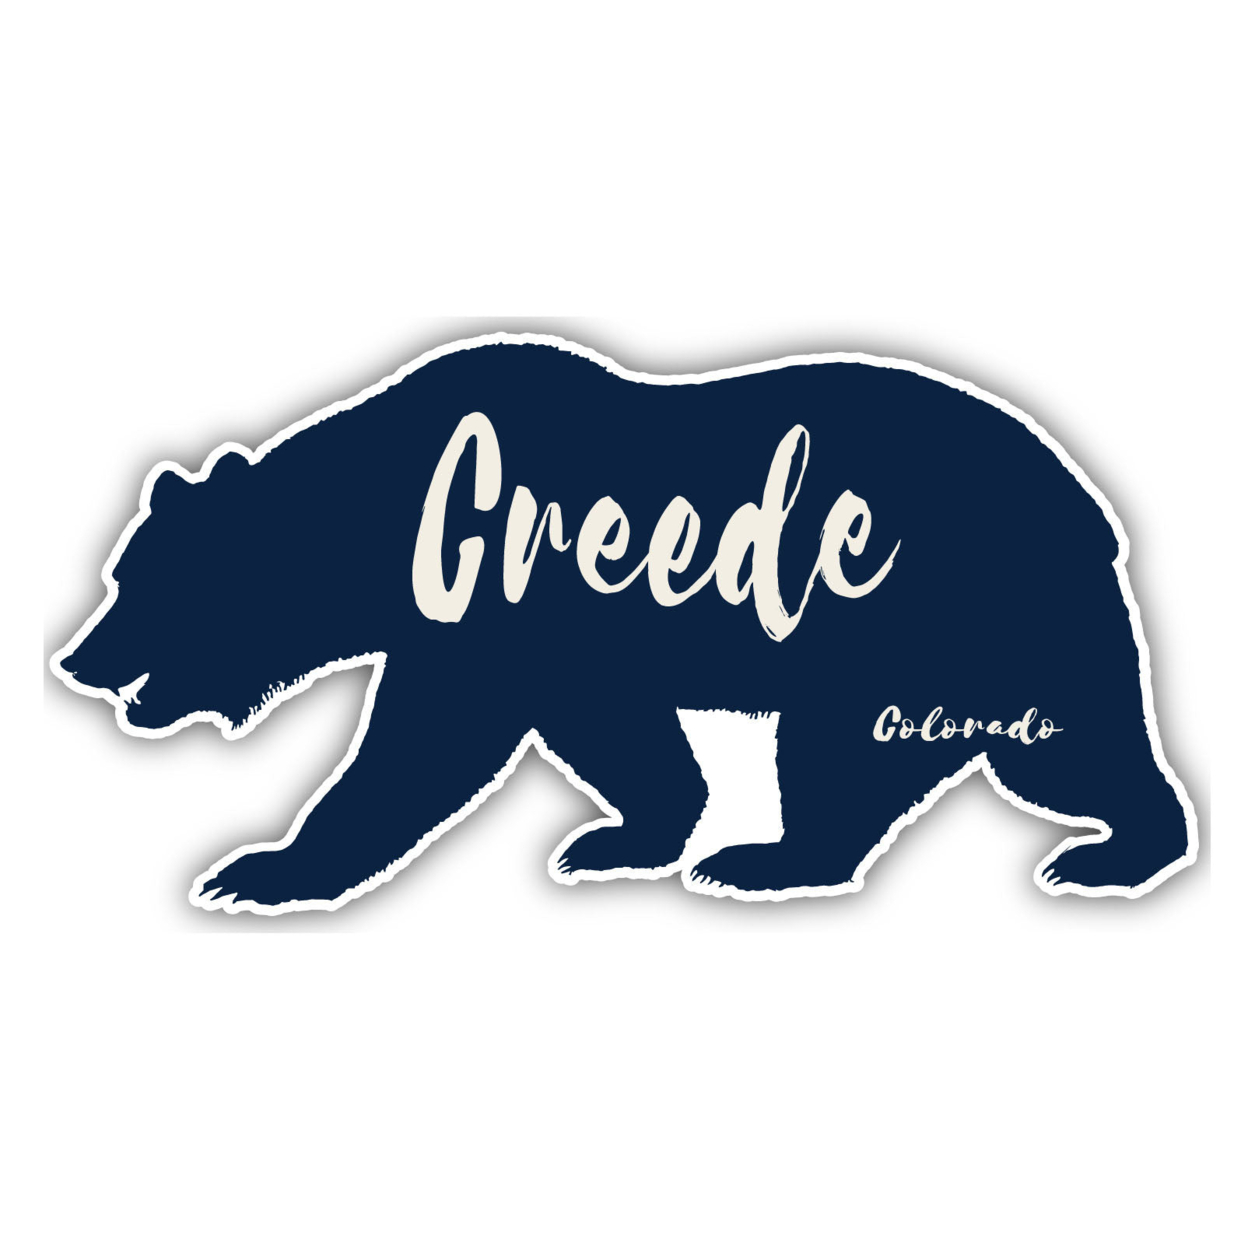 Creede Colorado Souvenir Decorative Stickers (Choose Theme And Size) - 4-Pack, 12-Inch, Bear